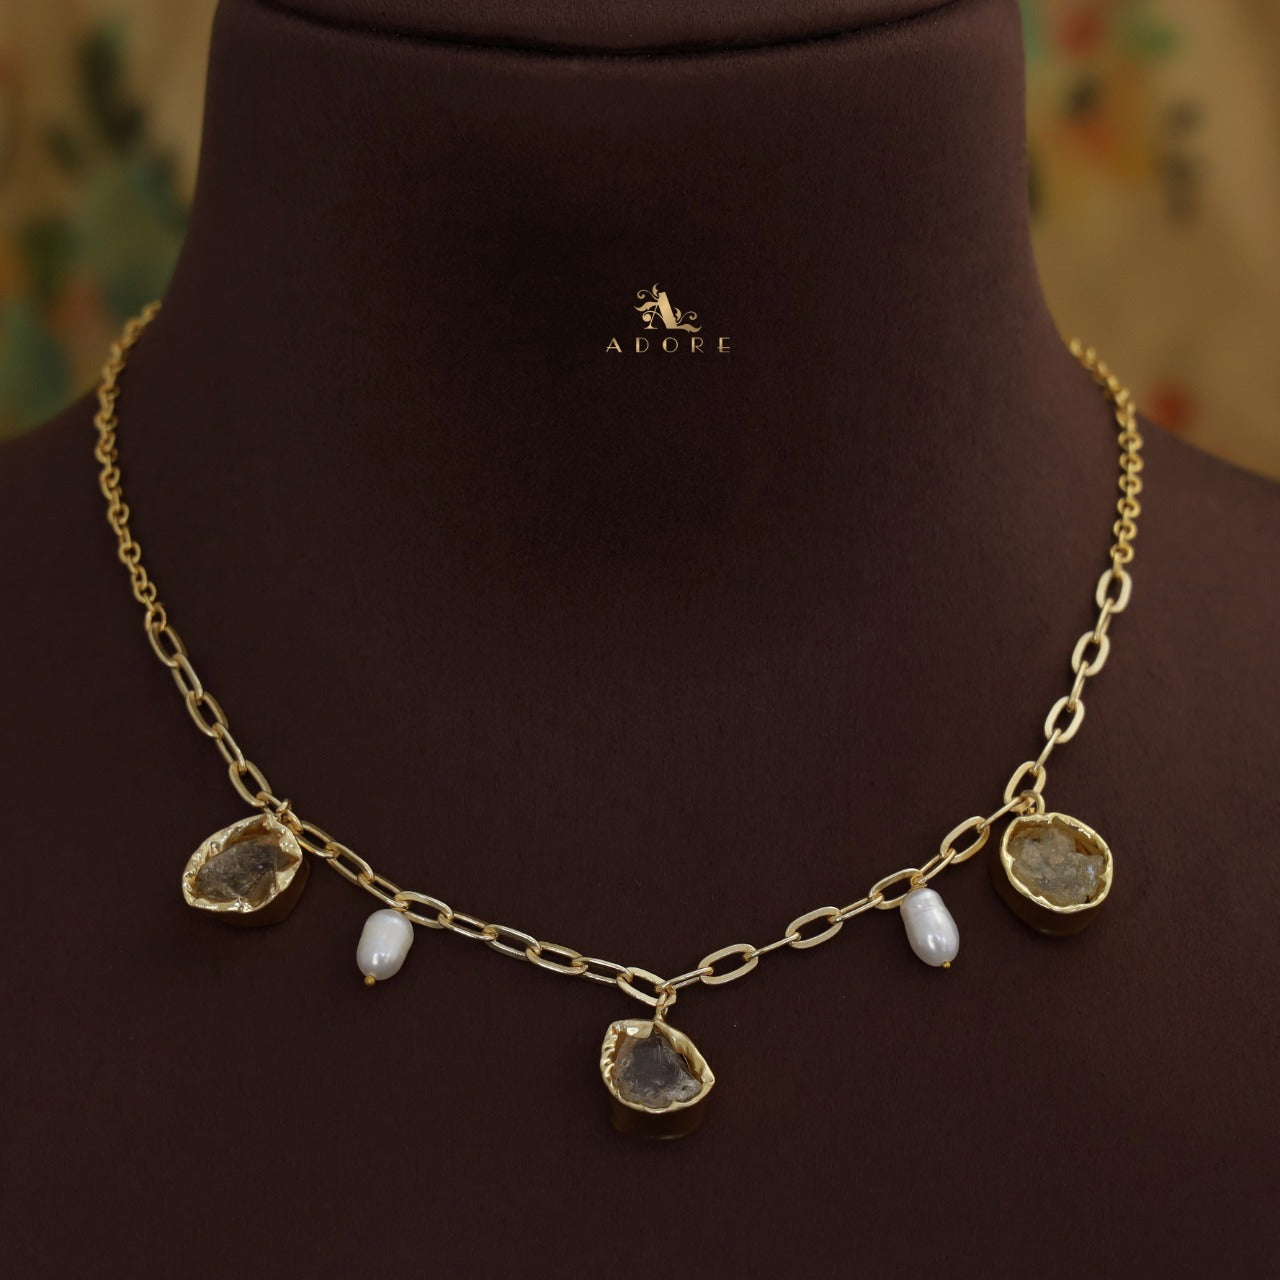 DABAKAROV Mother of Pearl Necklace - Lilliane's Jewelry